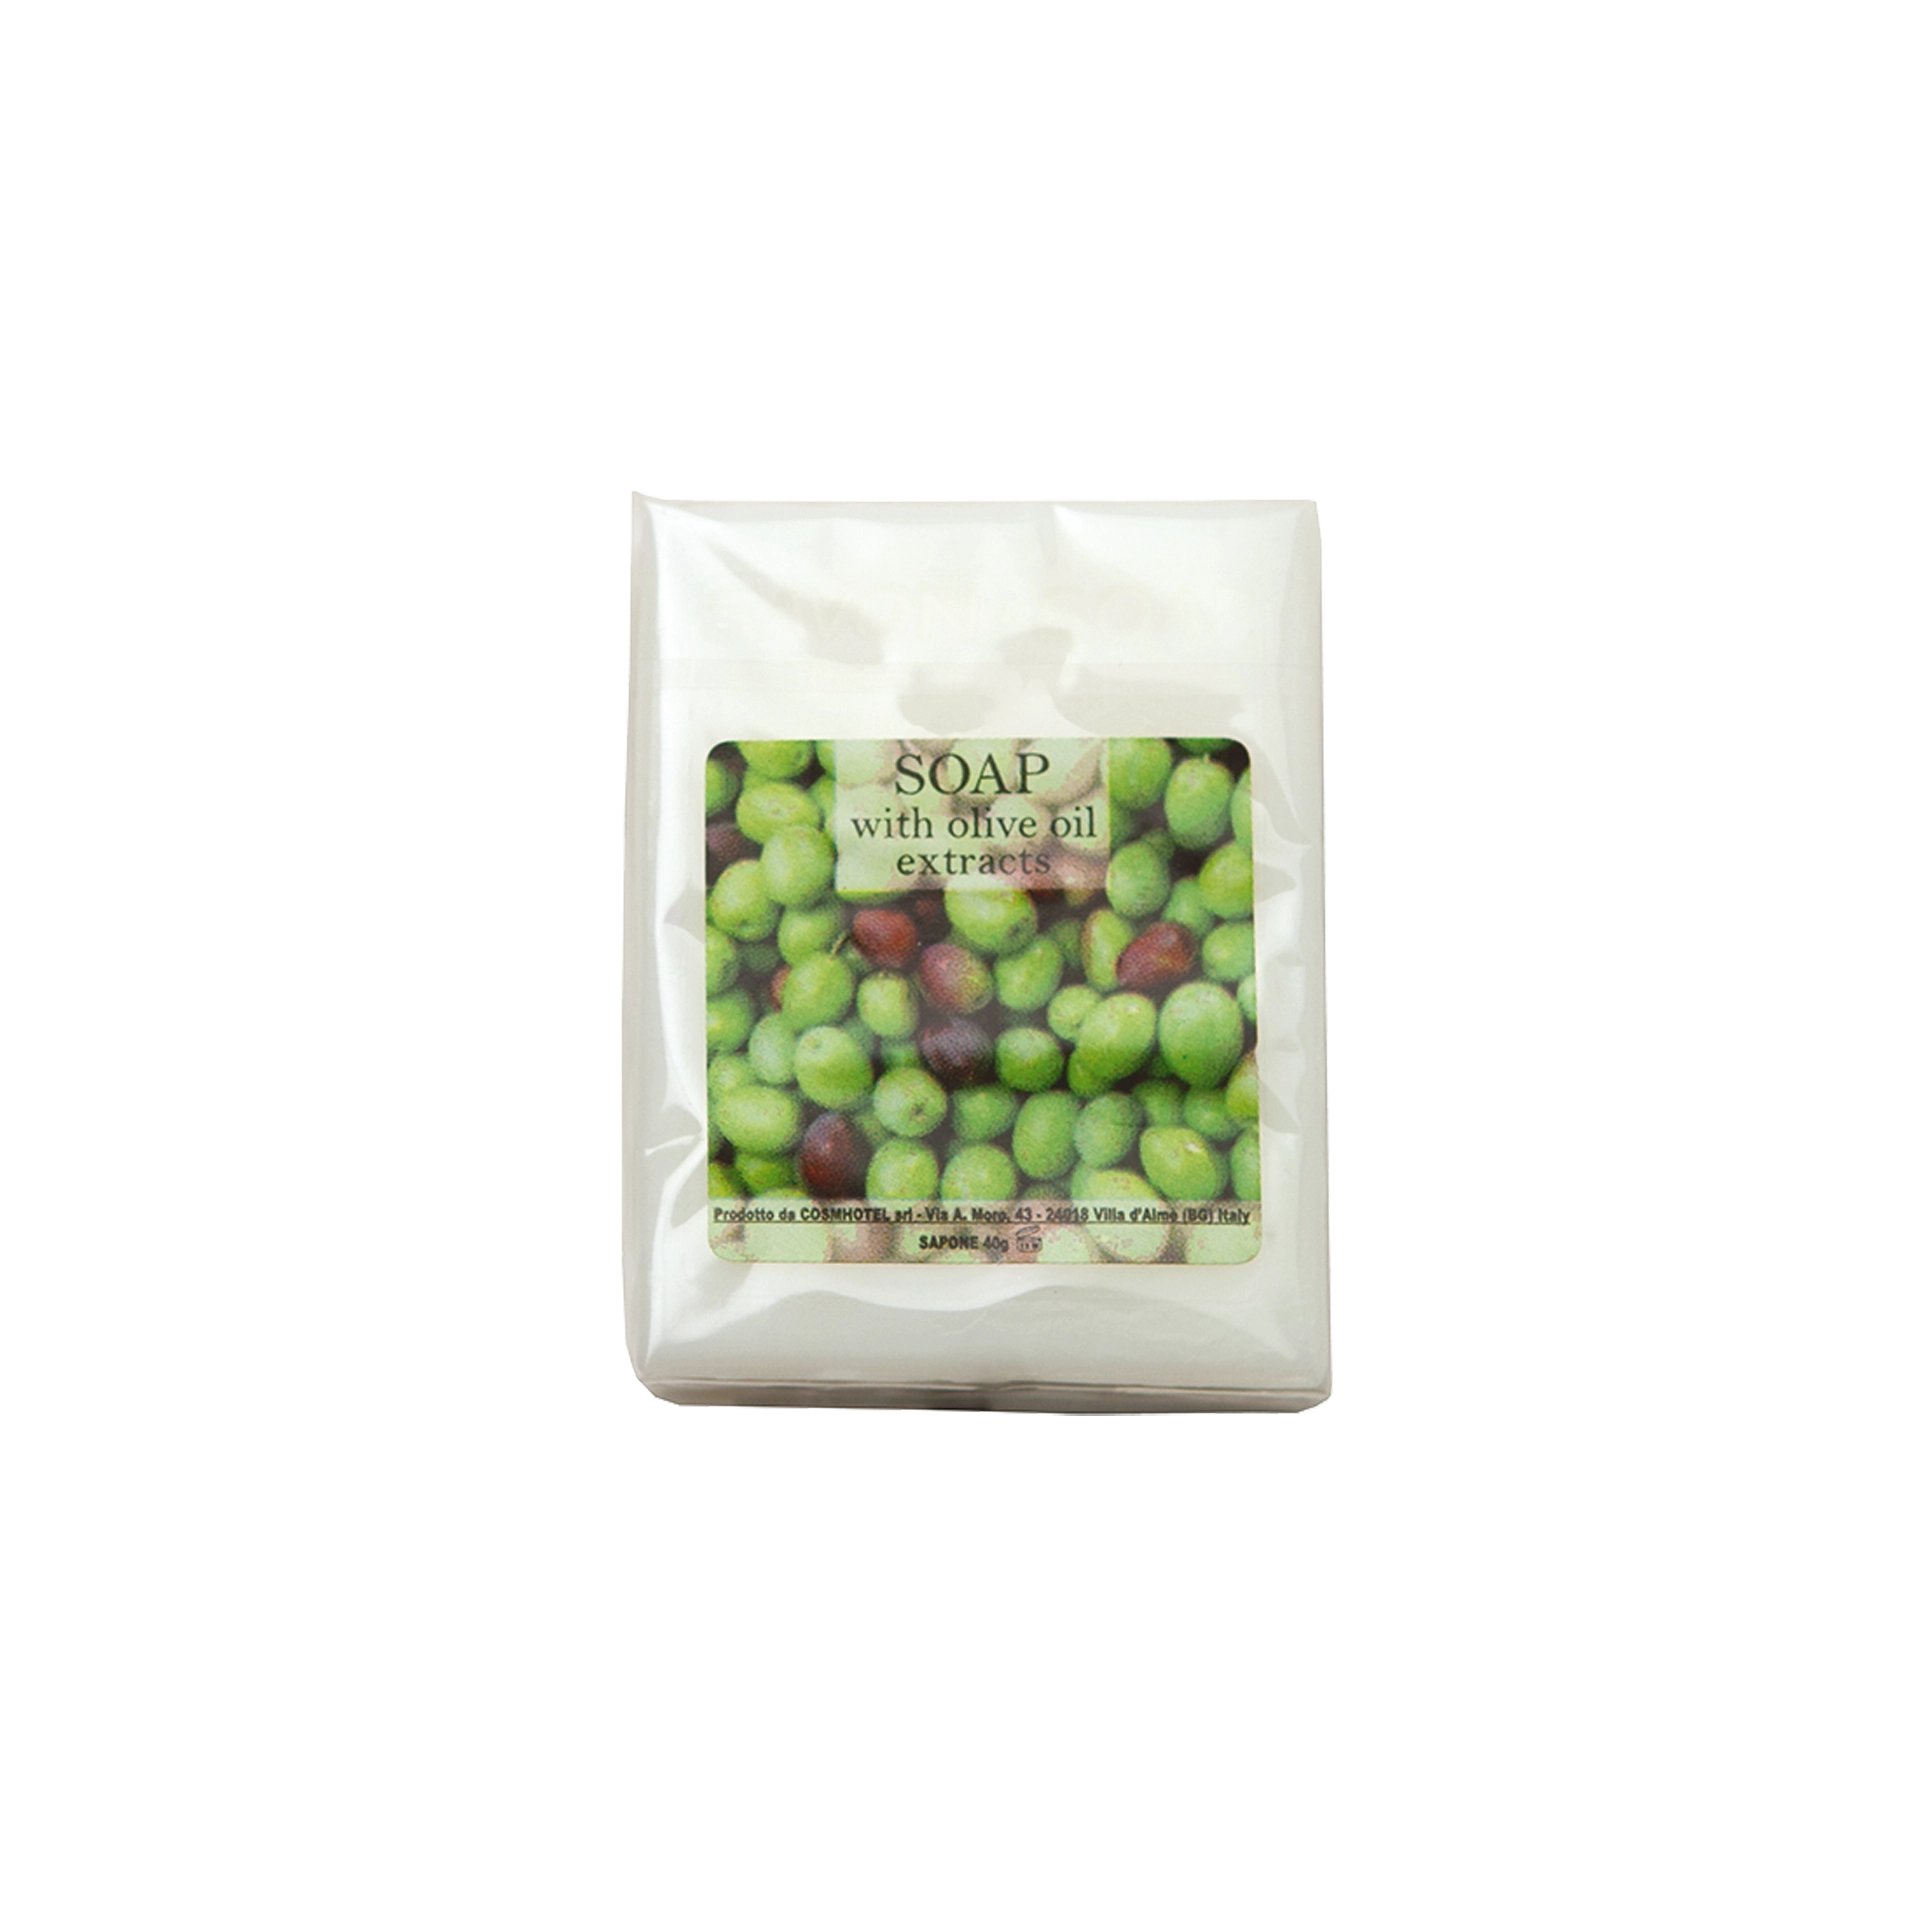 Hotelseife Natural Mix Olive 20 g in Nylon verpackt mit Strip  